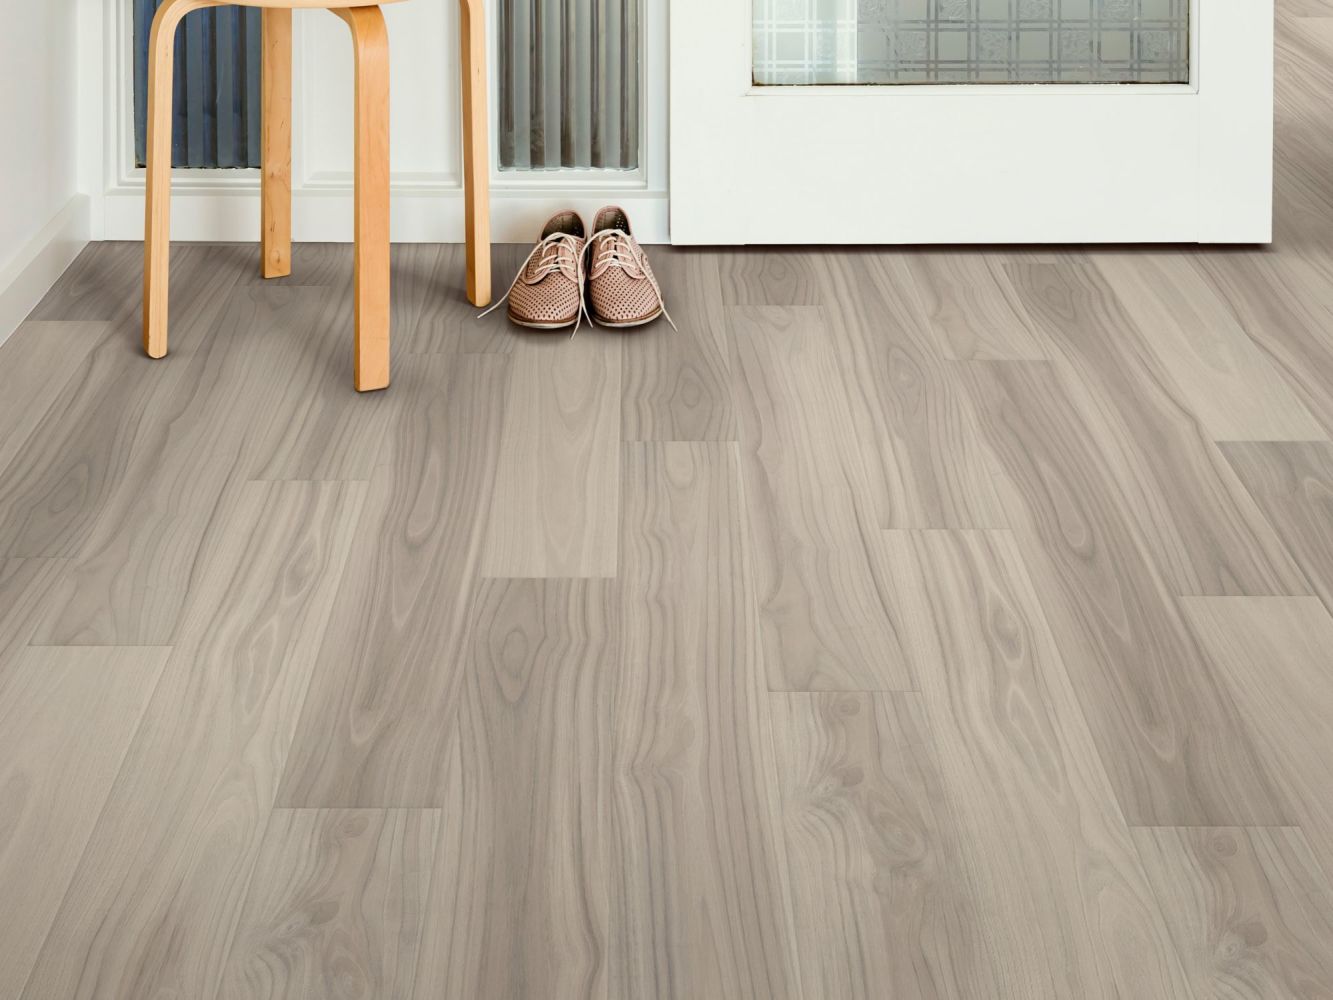 Shaw Floors Resilient Property Solutions Supino Hd+natural Bevel Smoke 05130_VE441